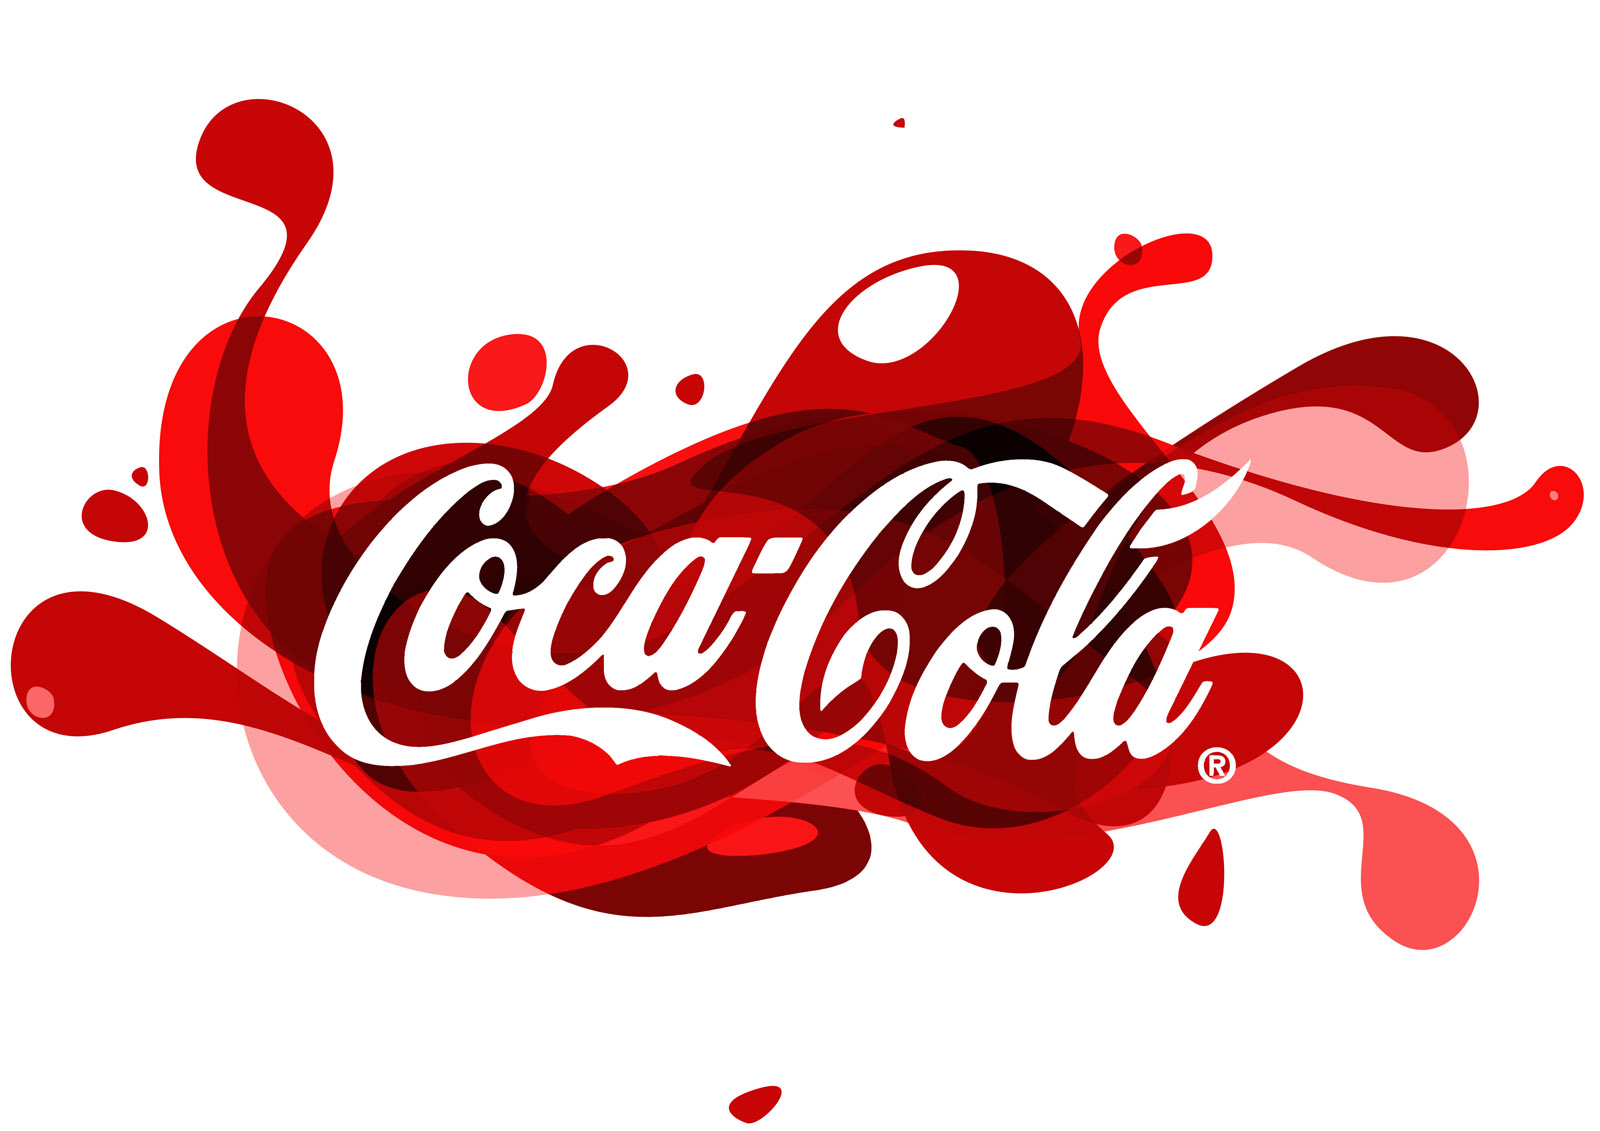 Coca Cola Free Ppt Backgrounds For Your Powerpoint Templates Inside Coca Cola Powerpoint Template